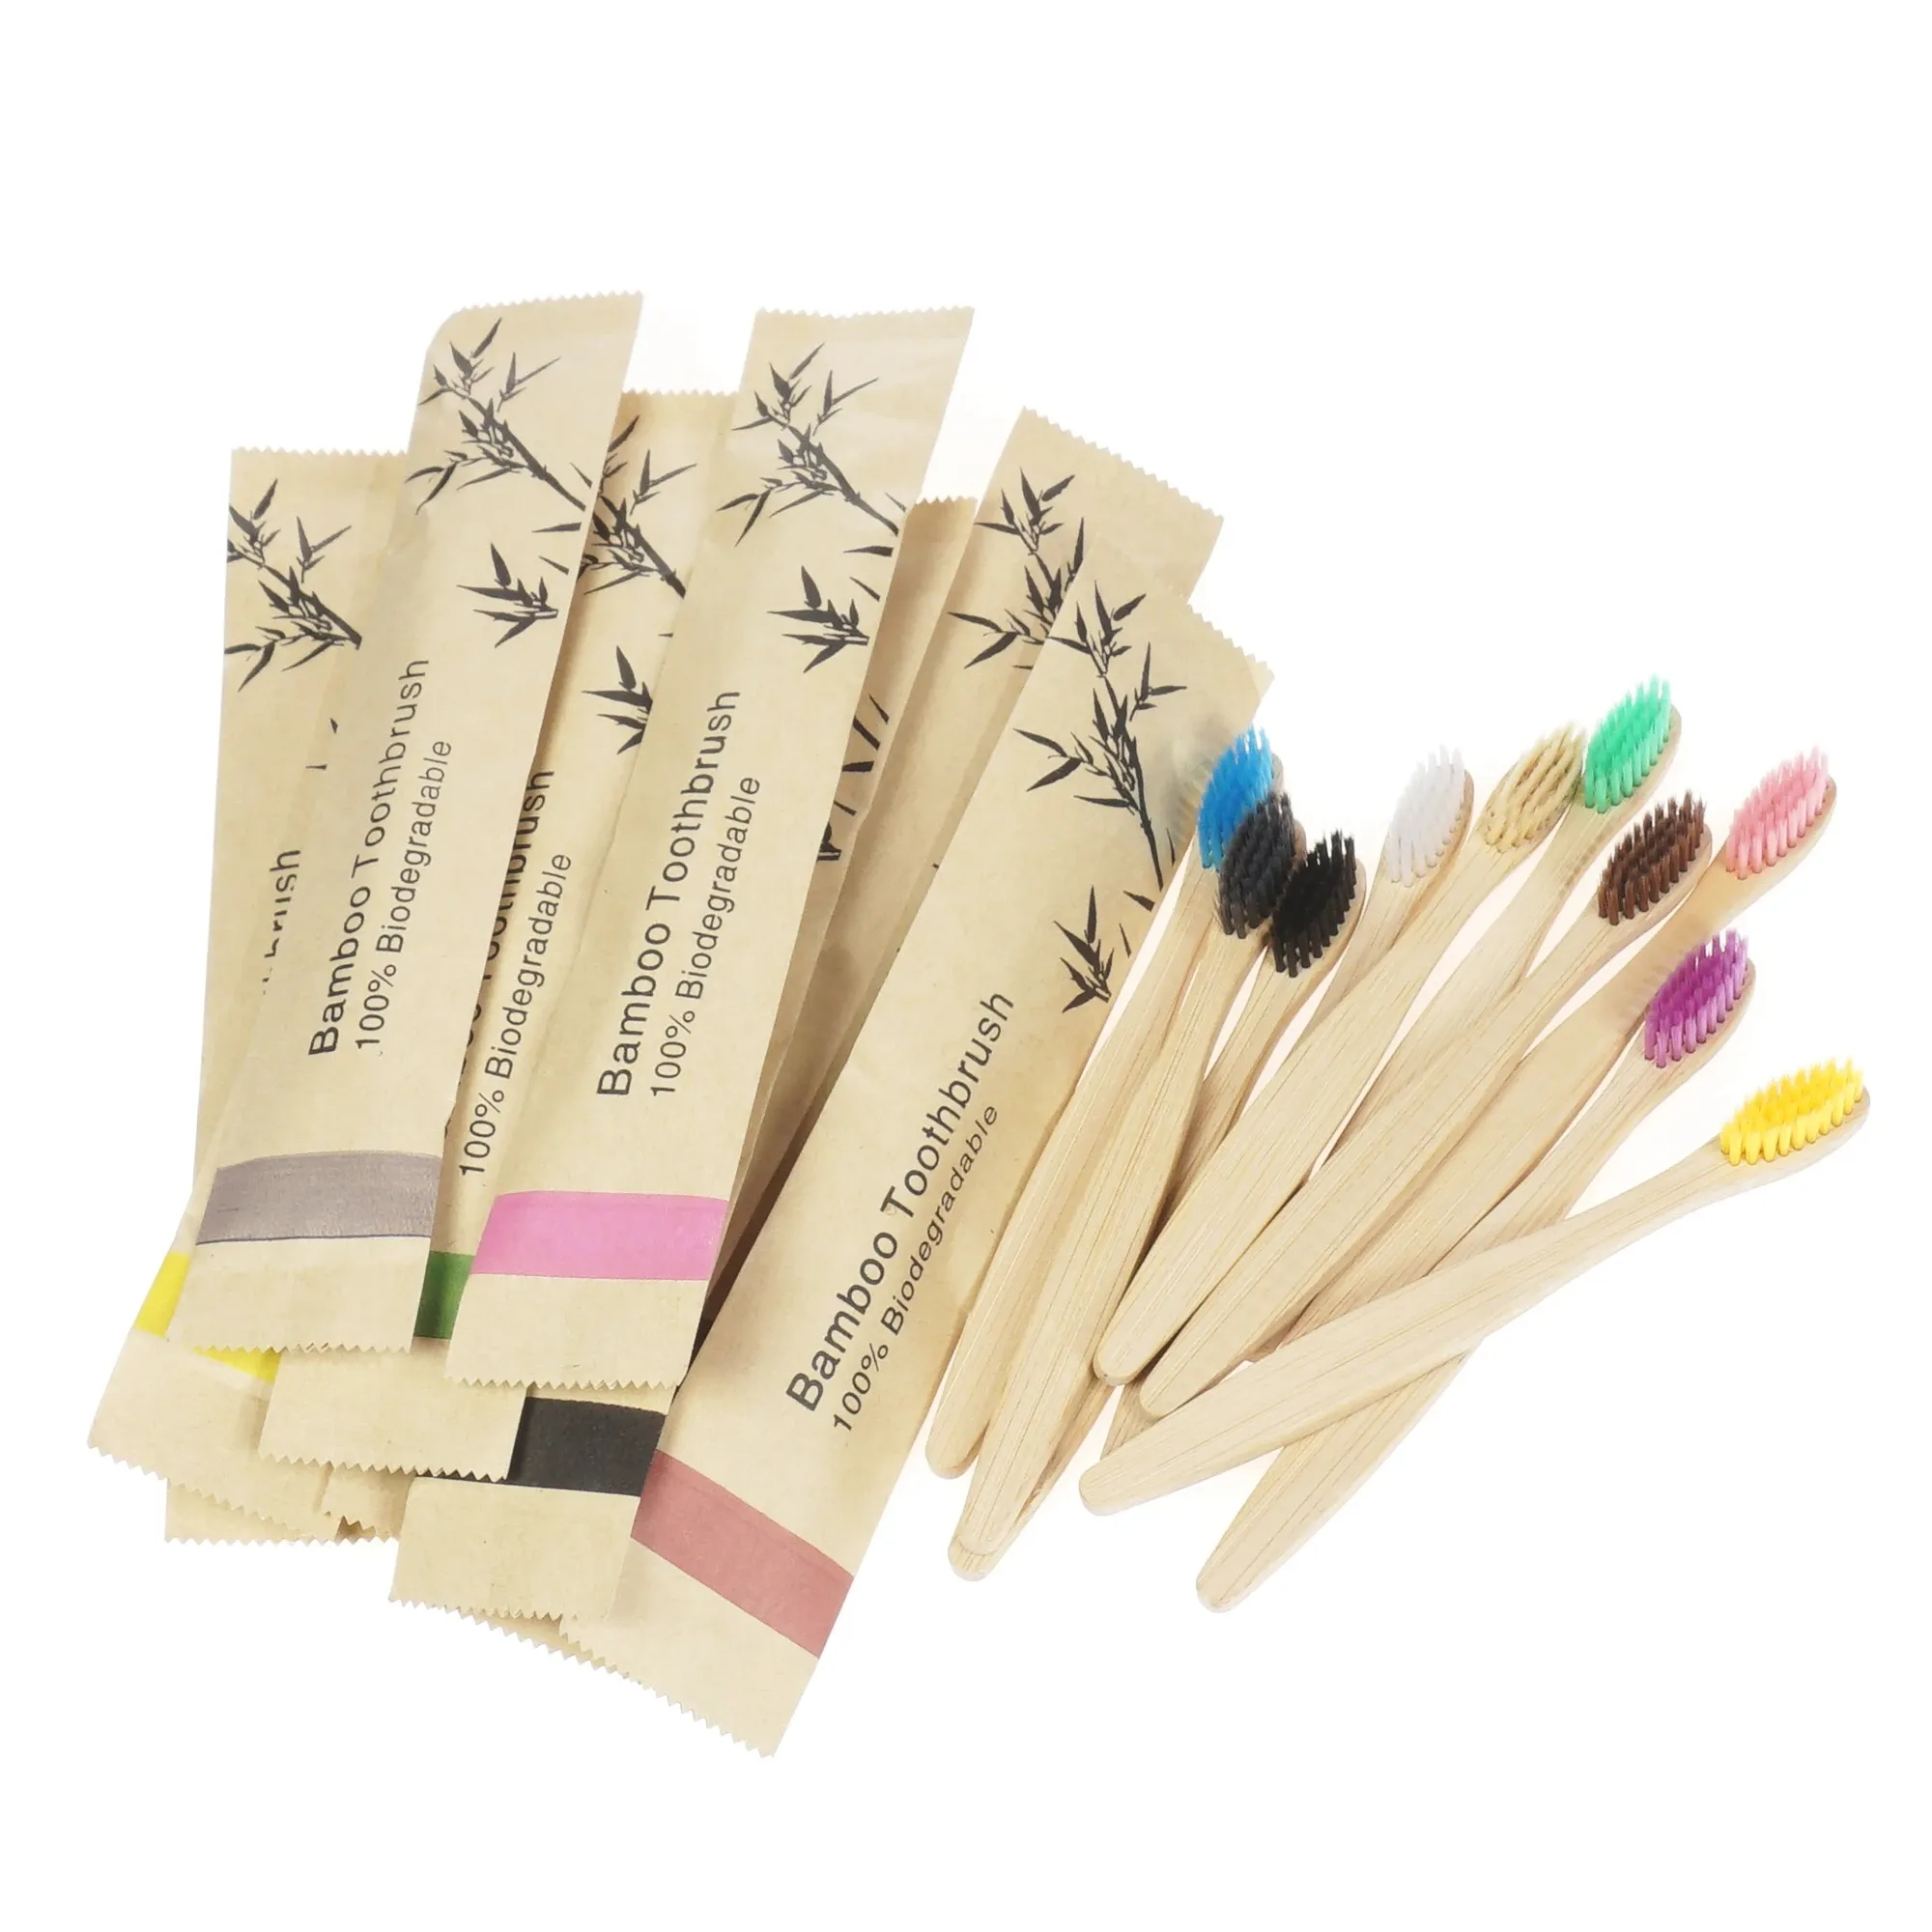 Colorful Natural Bamboo Toothbrush Set Soft Bristle Charcoal Teeth Whitening Bamboo Toothbrushes Soft Dental Oral Care